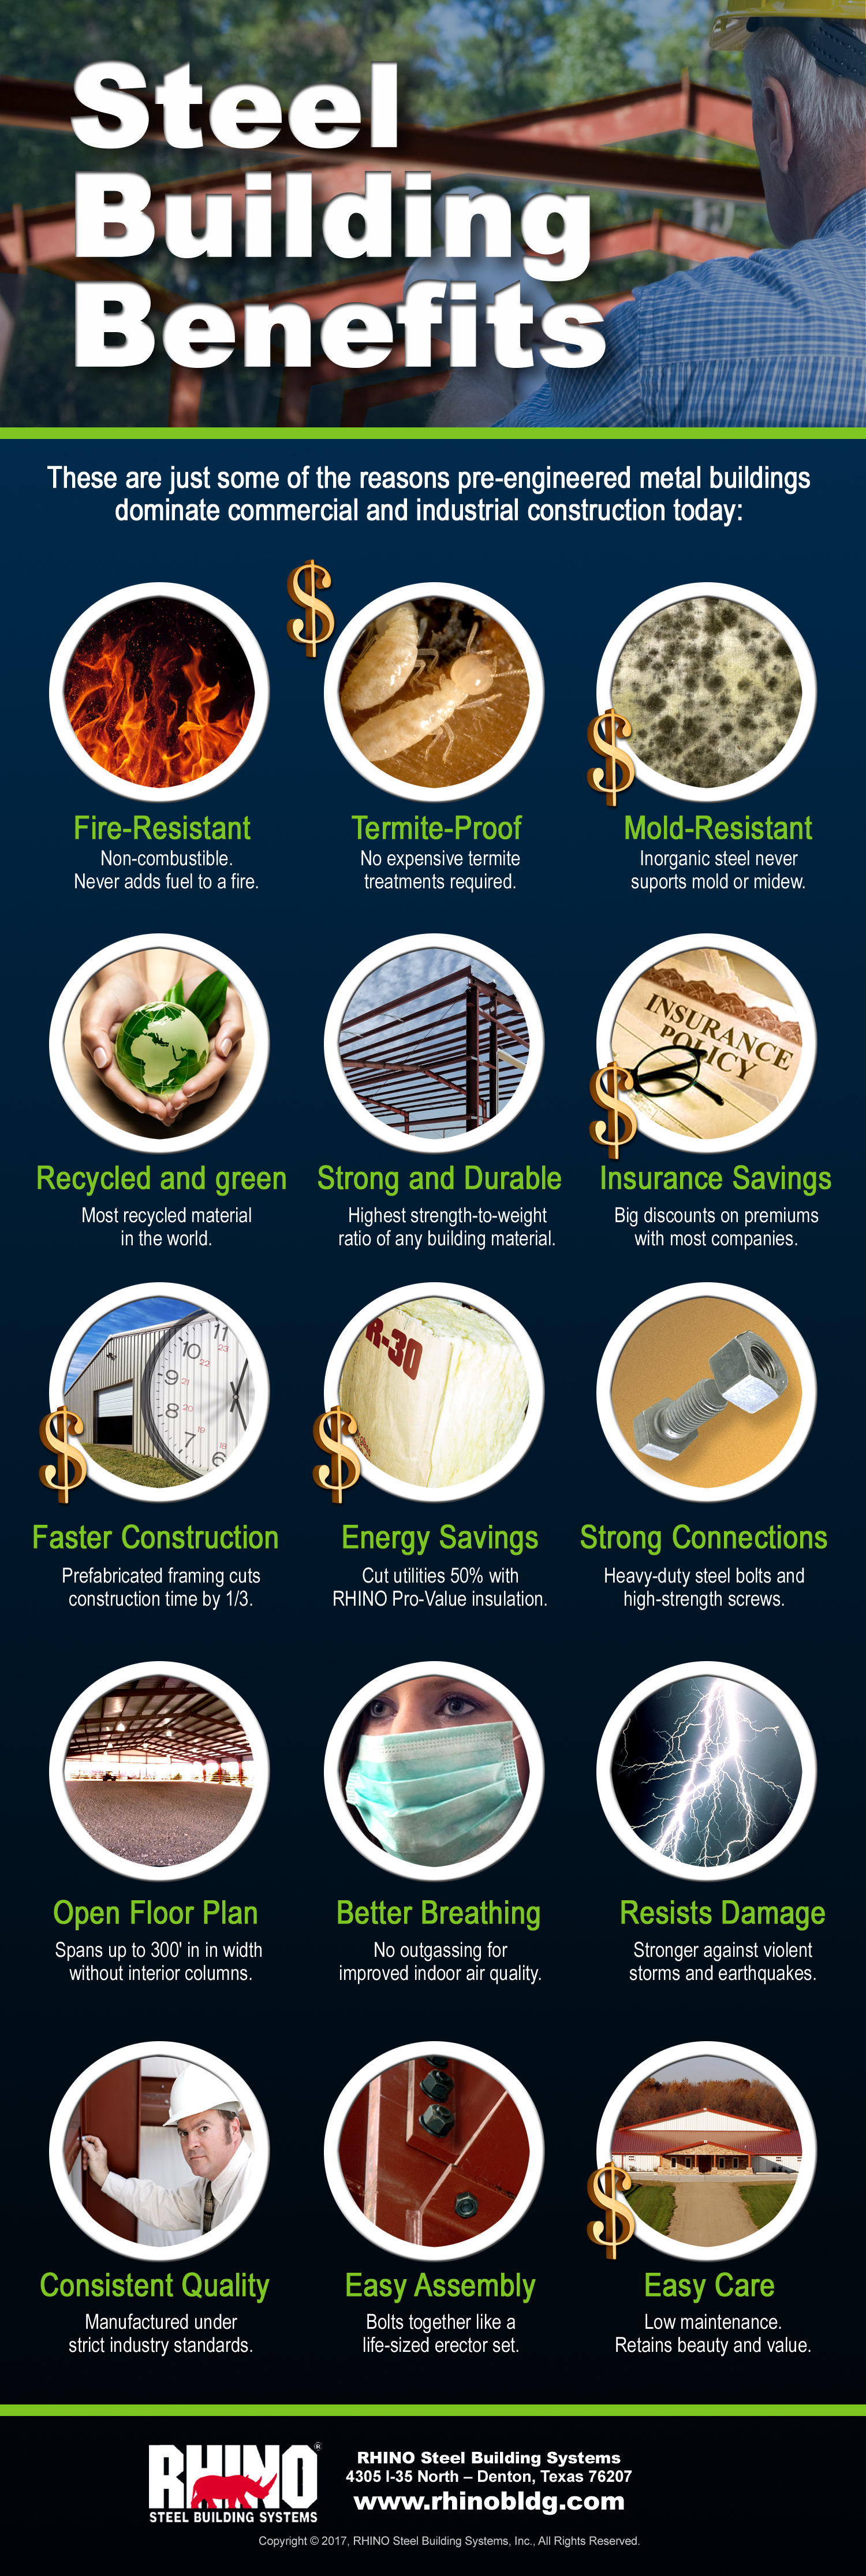 RHINO infographic depicting 15 benefits provided by metal building kits.